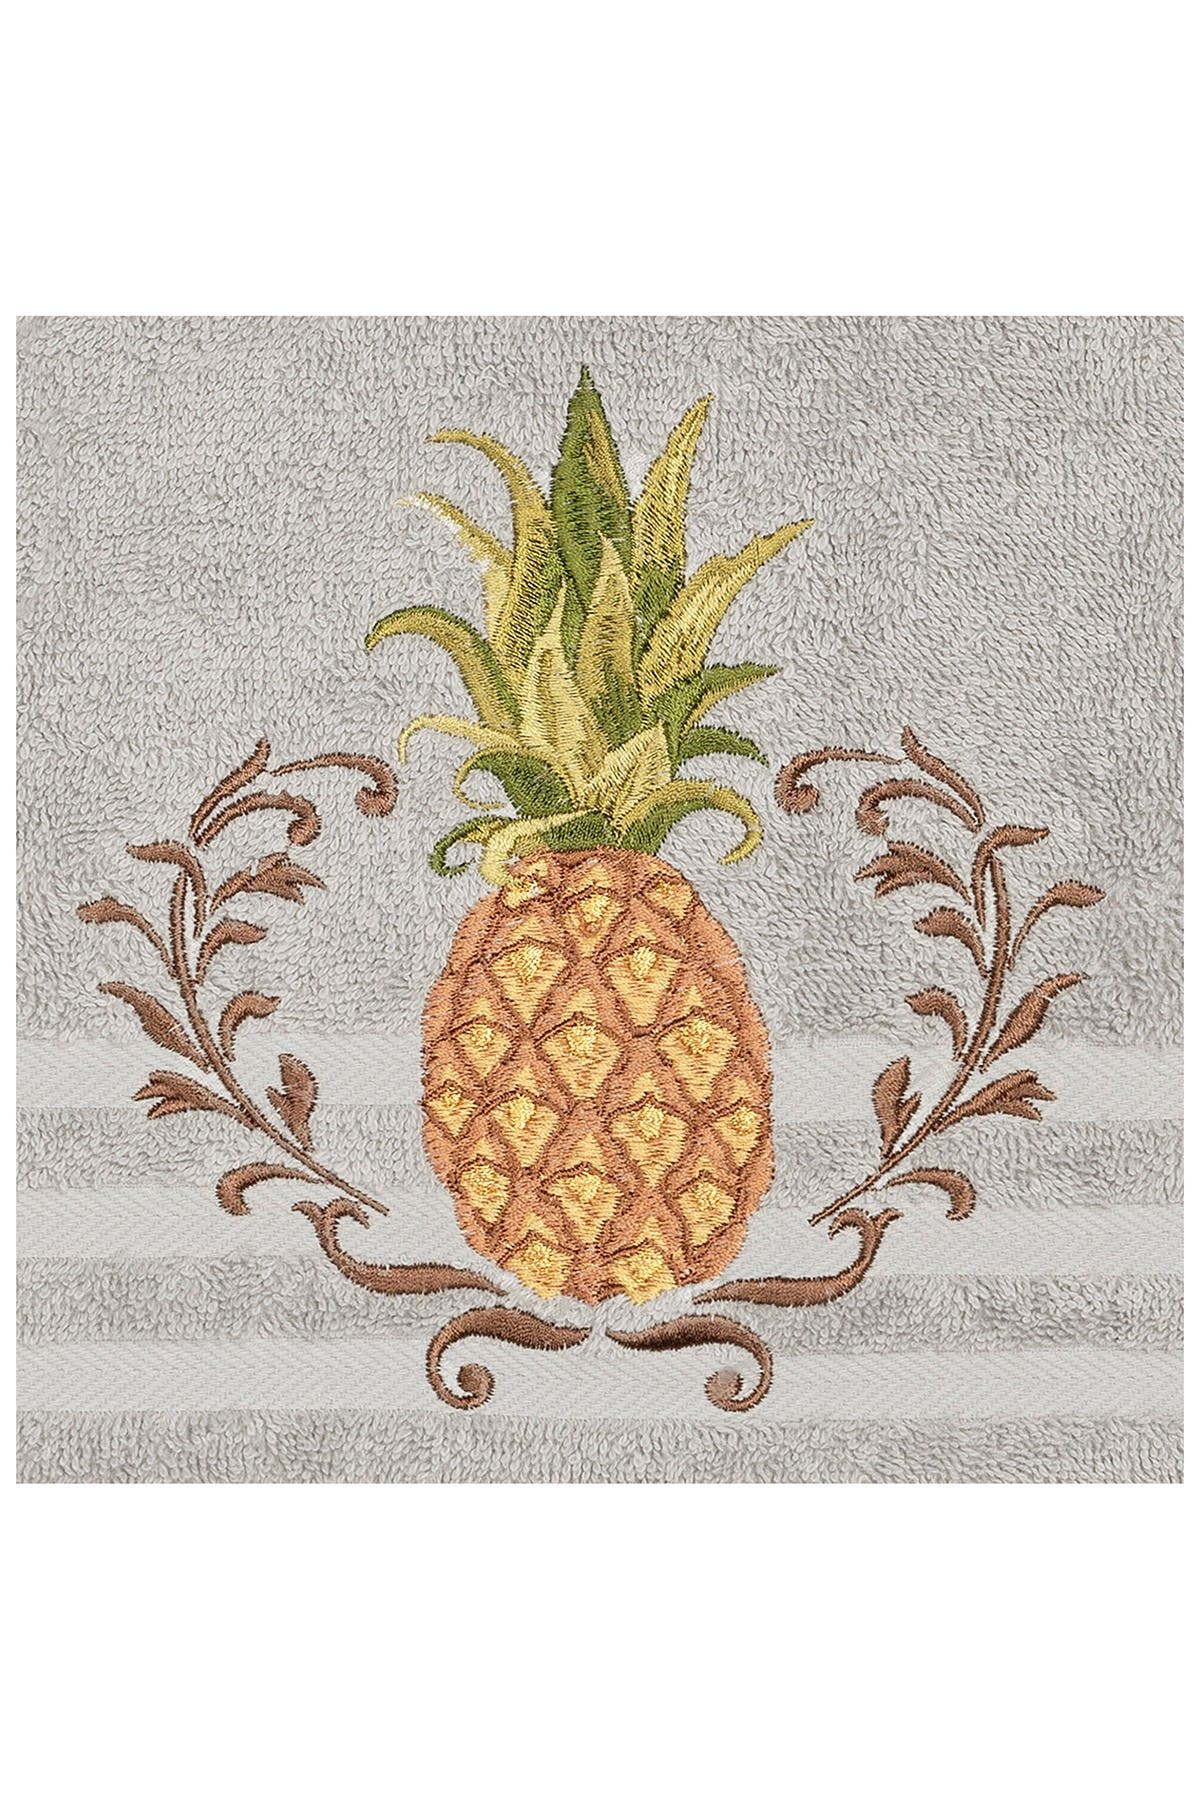 Pineapple Plate 10" by Barbara  Mock  Porcelain  Decorative  Brown Background 